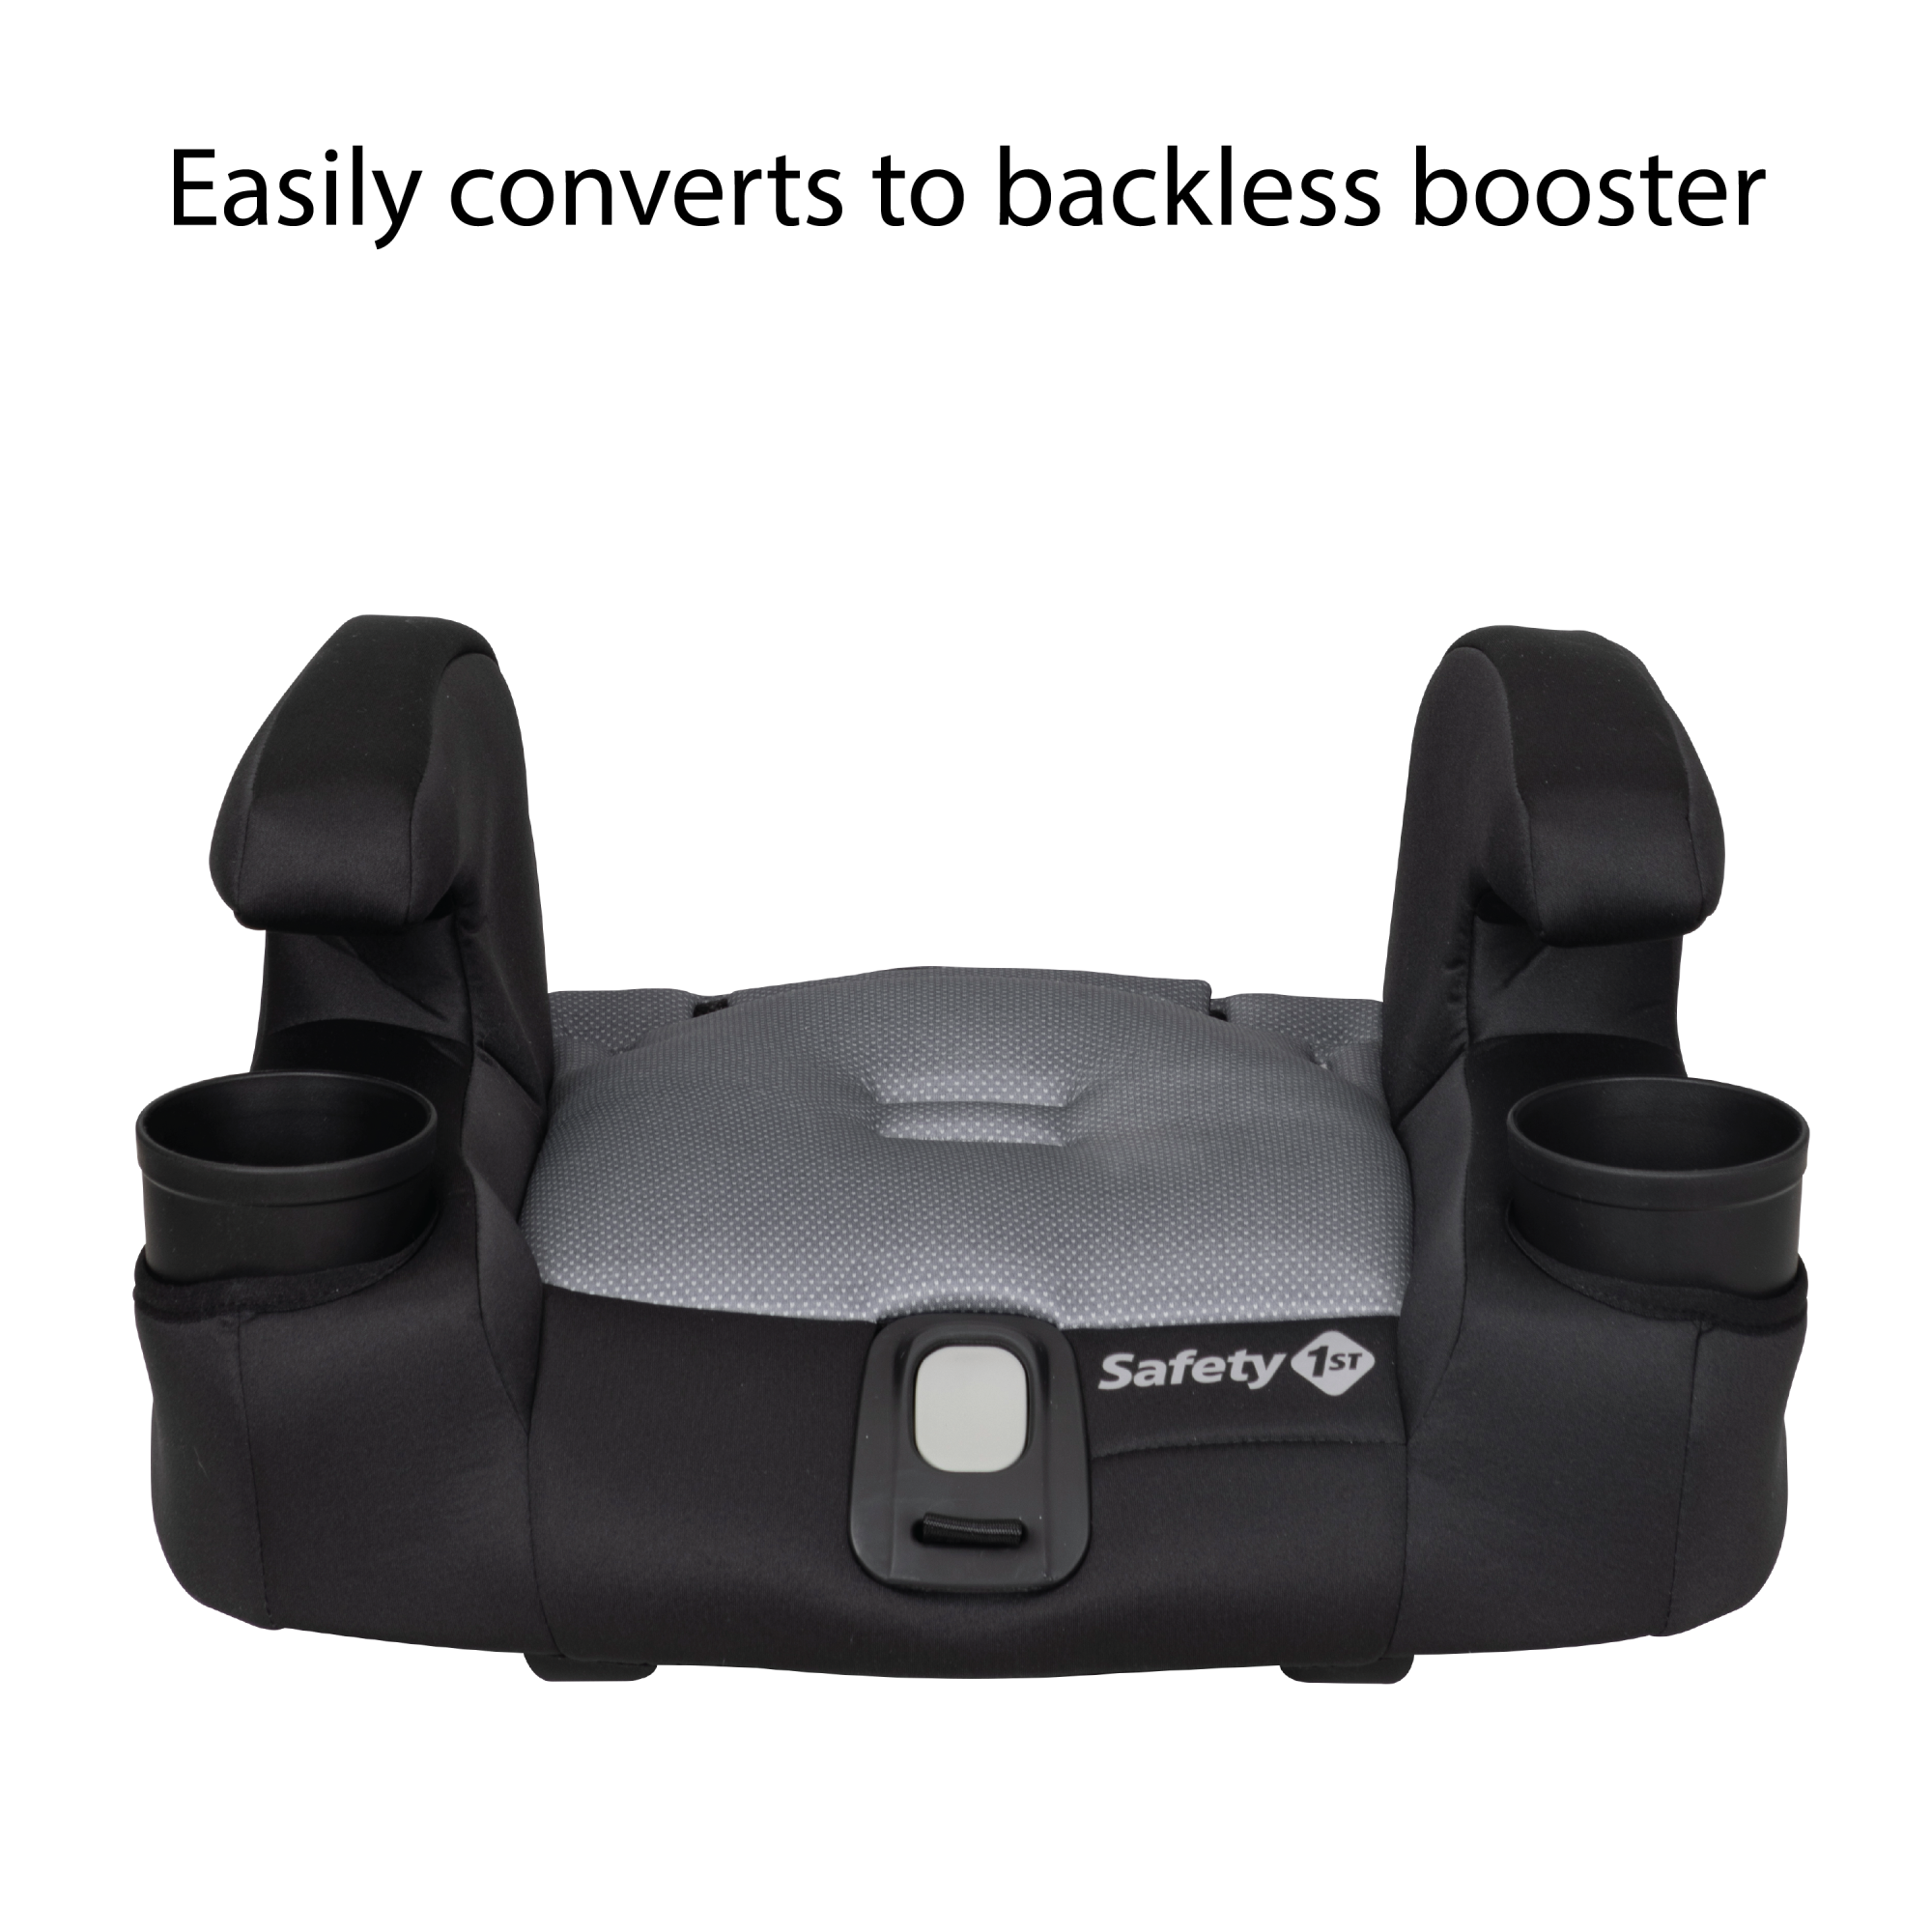 Boost-and-Go All-in-One Harness Booster Car Seat - easily converts to backless booster